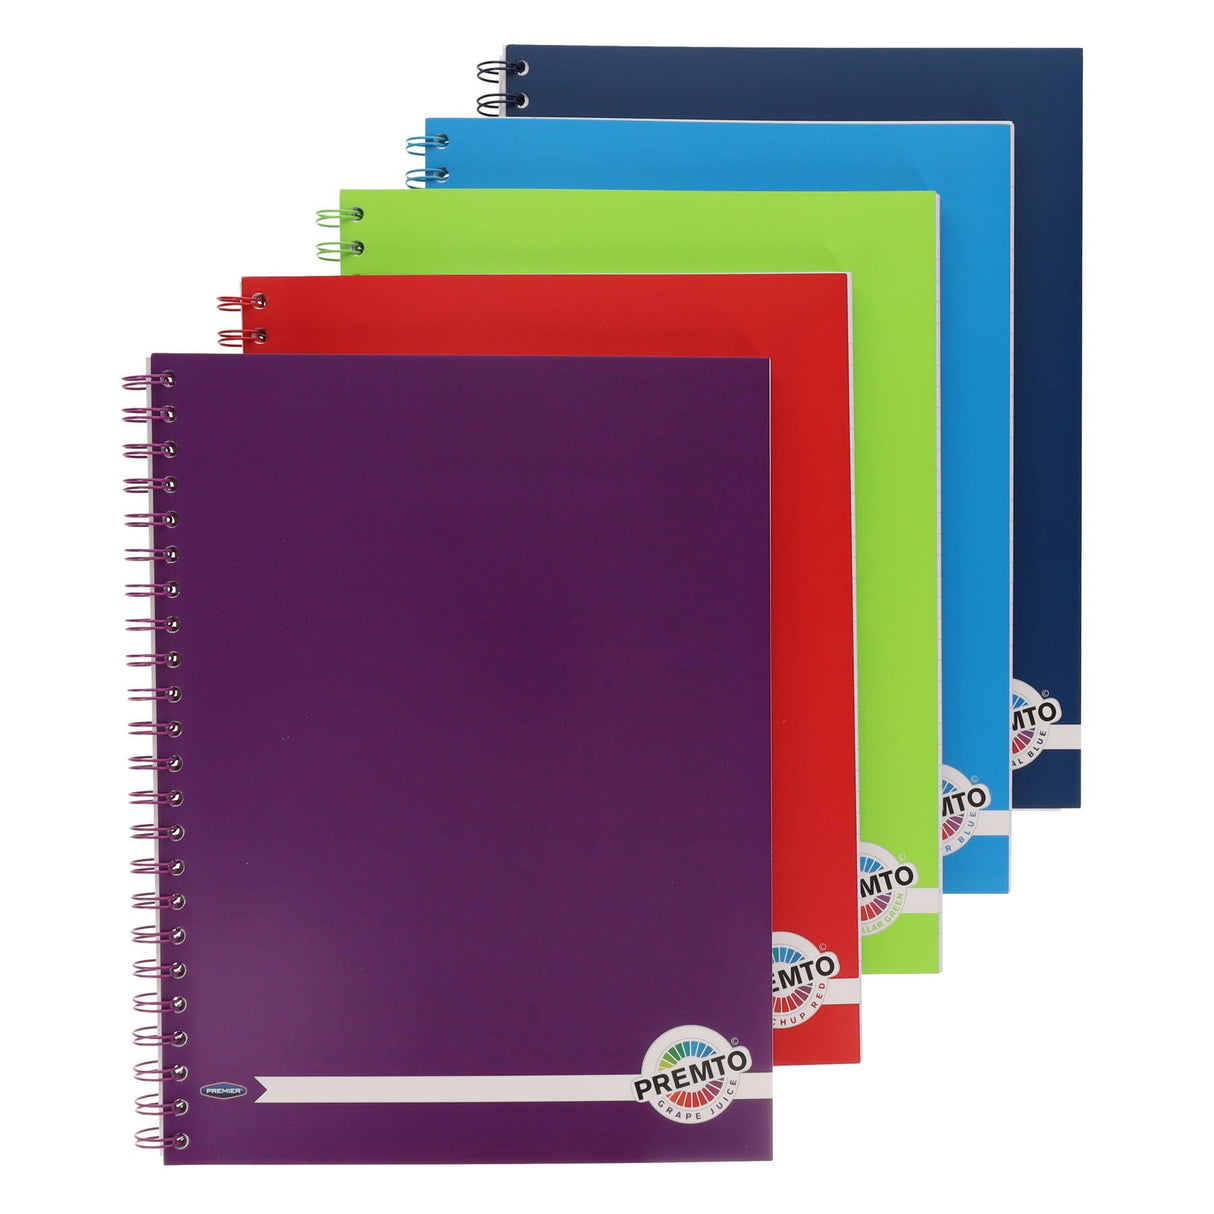 Premto A4 Wiro Notebook - 200 Pages - Admiral Blue-A4 Notebooks- Buy Online at Stationery Shop UK